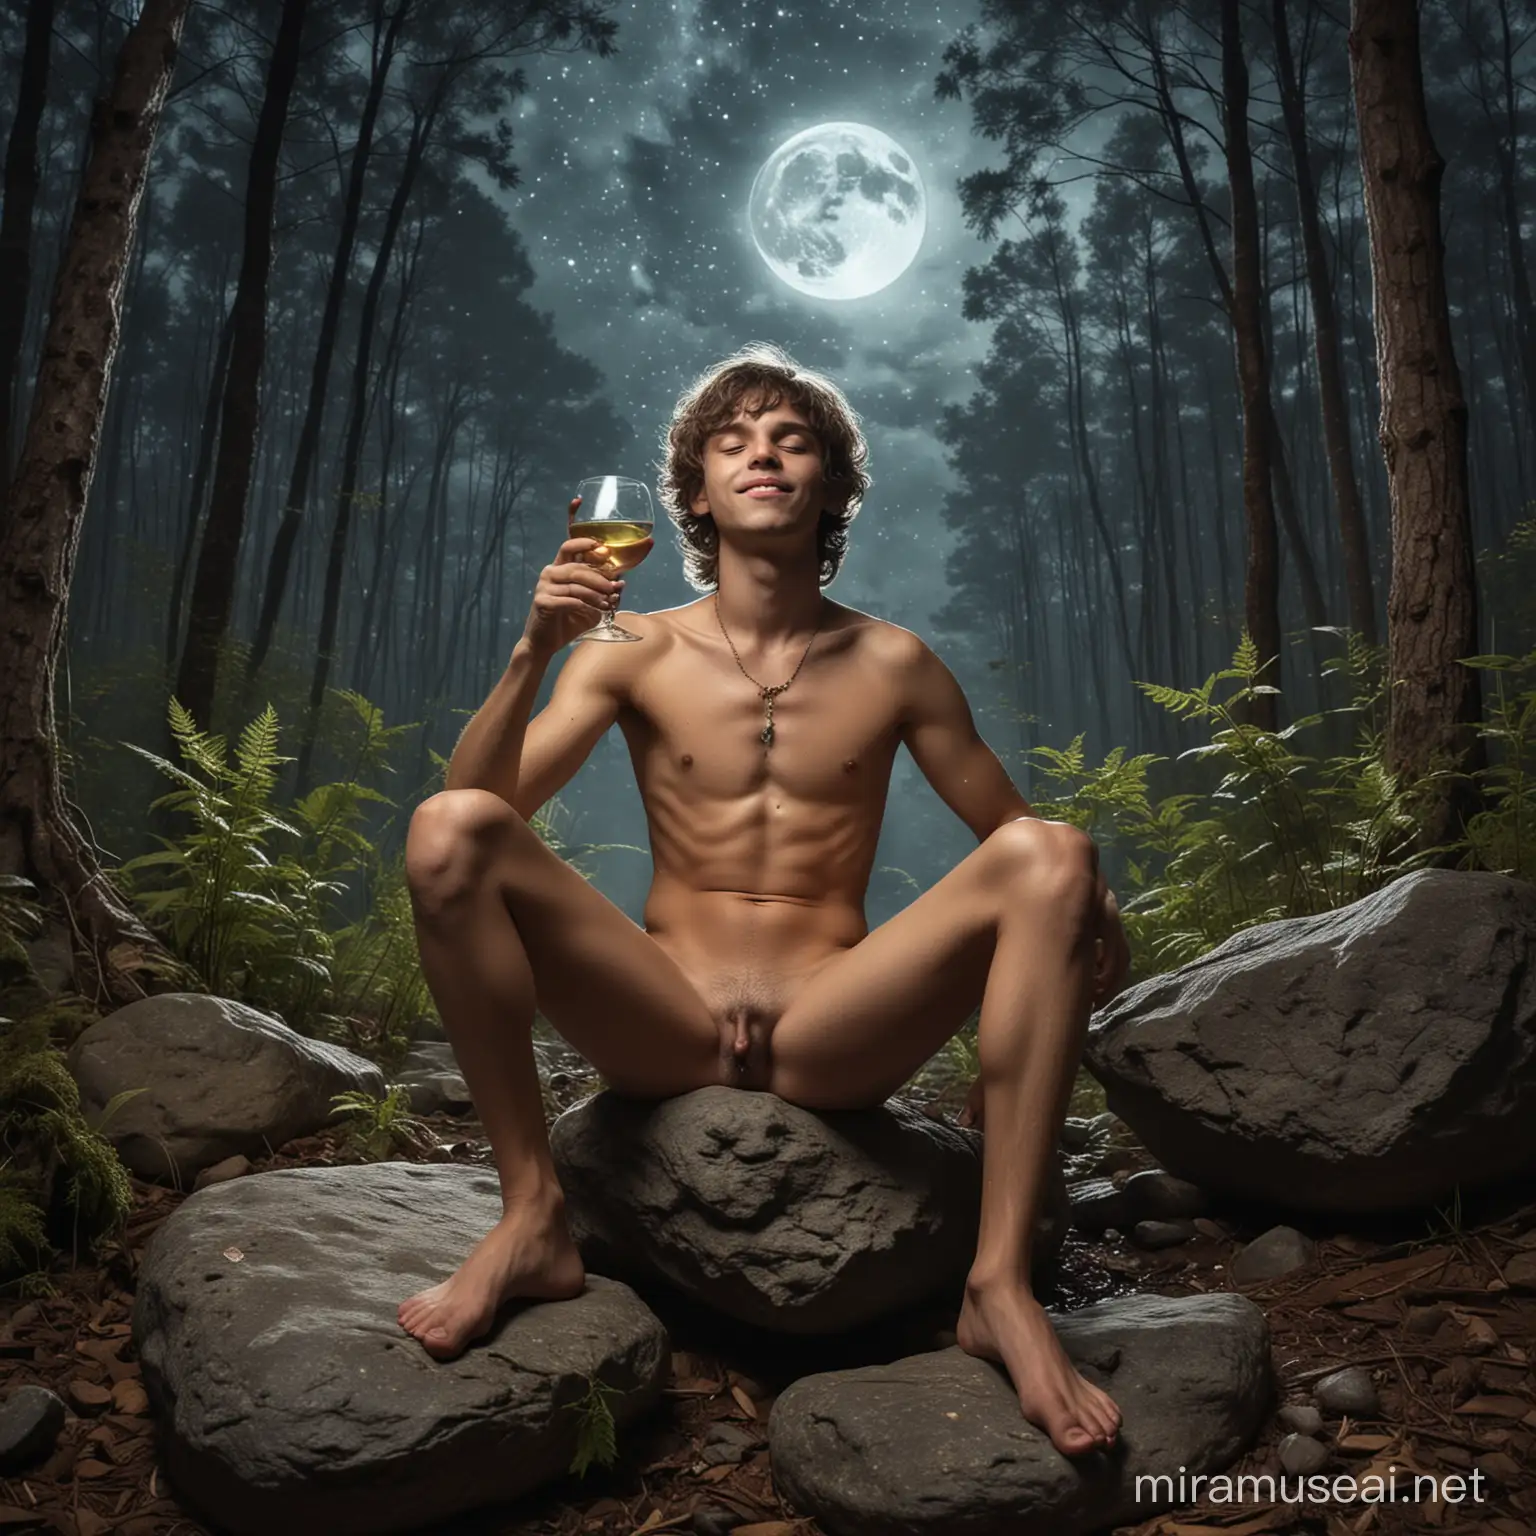 transparant glass, psychedelic, young boy naked sexy anthropomorphic, in a forest, sit down in a rock, drinking wine, smoking cannabis, moon, happy. Black sky with stars and a golden ufo. Vagalumes ao redor